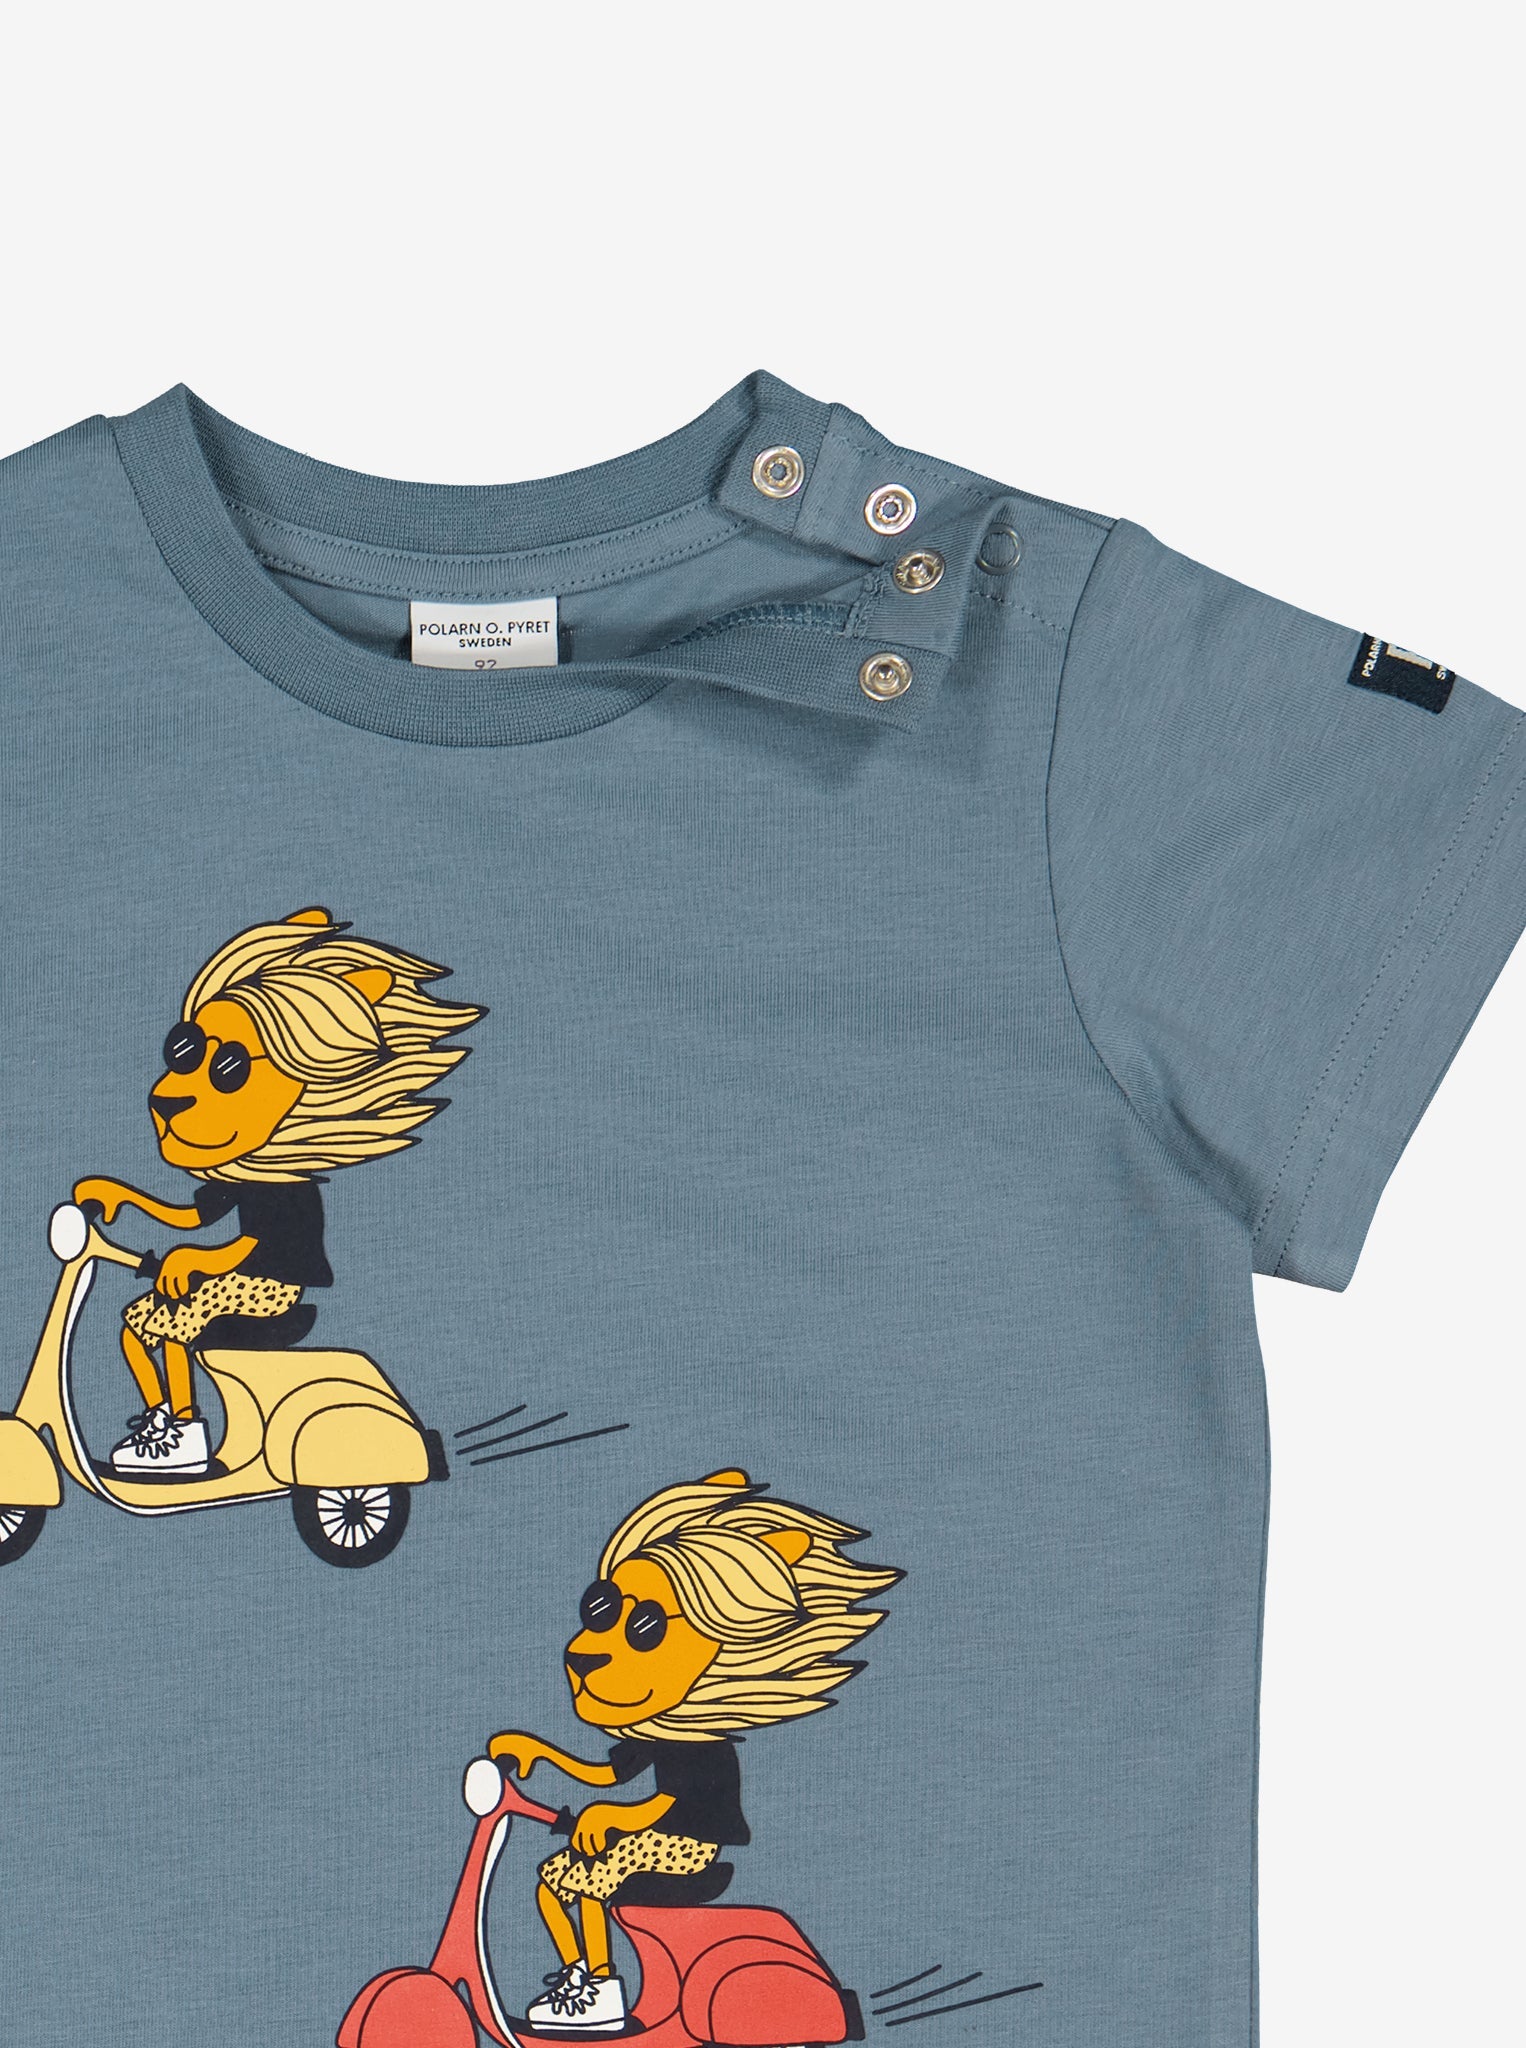 Lion Print Boys T-Shirt from Polarn O. Pyret Kidswear. Made using sustainable sourced materials.